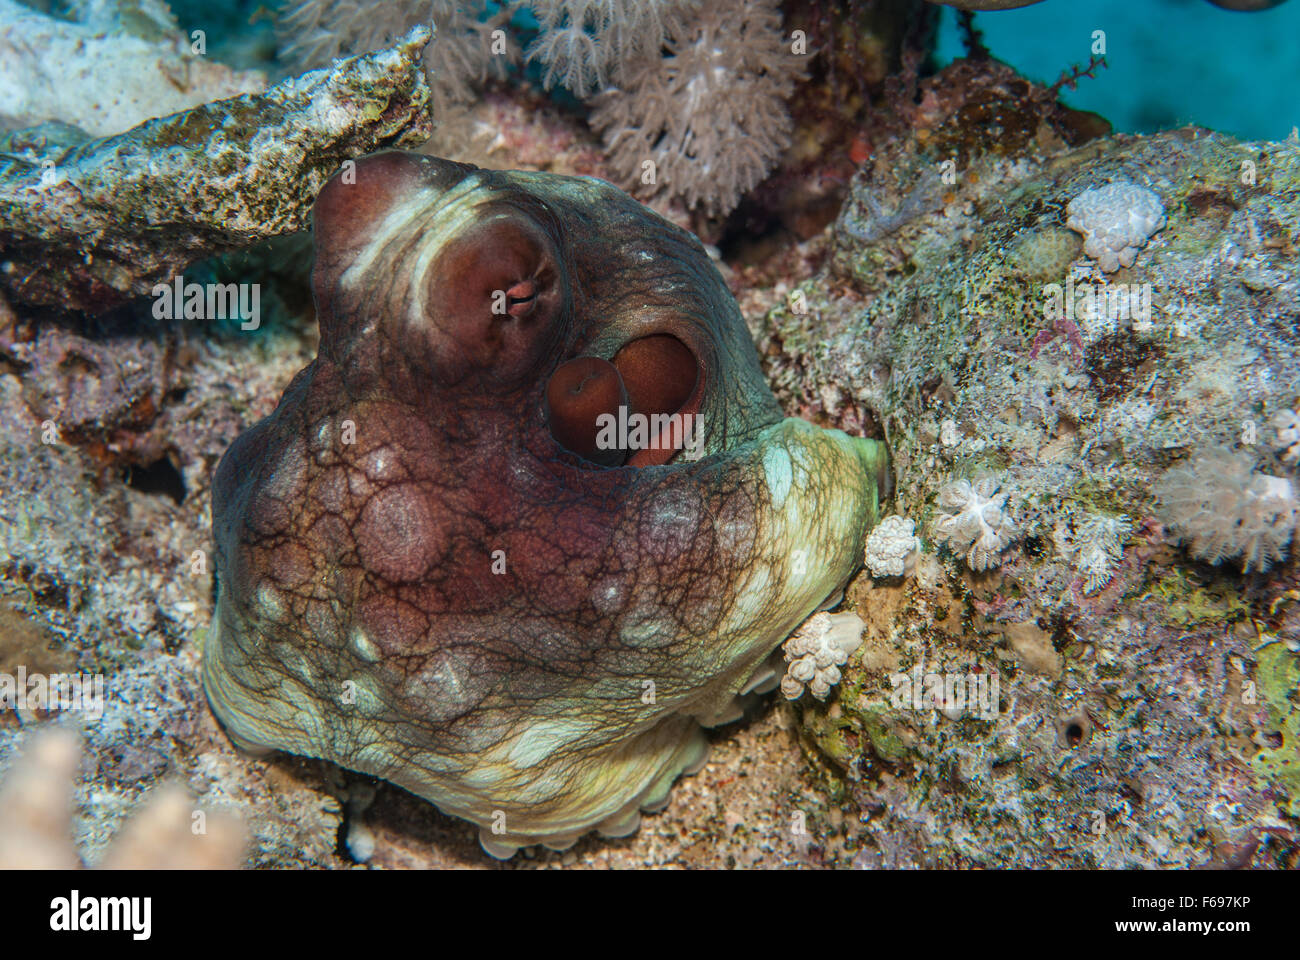 Big Red, octopus Octopus cyaneus, mollusques Cephalopoda, Charm el-Cheikh, Red Sea, Egypt Banque D'Images